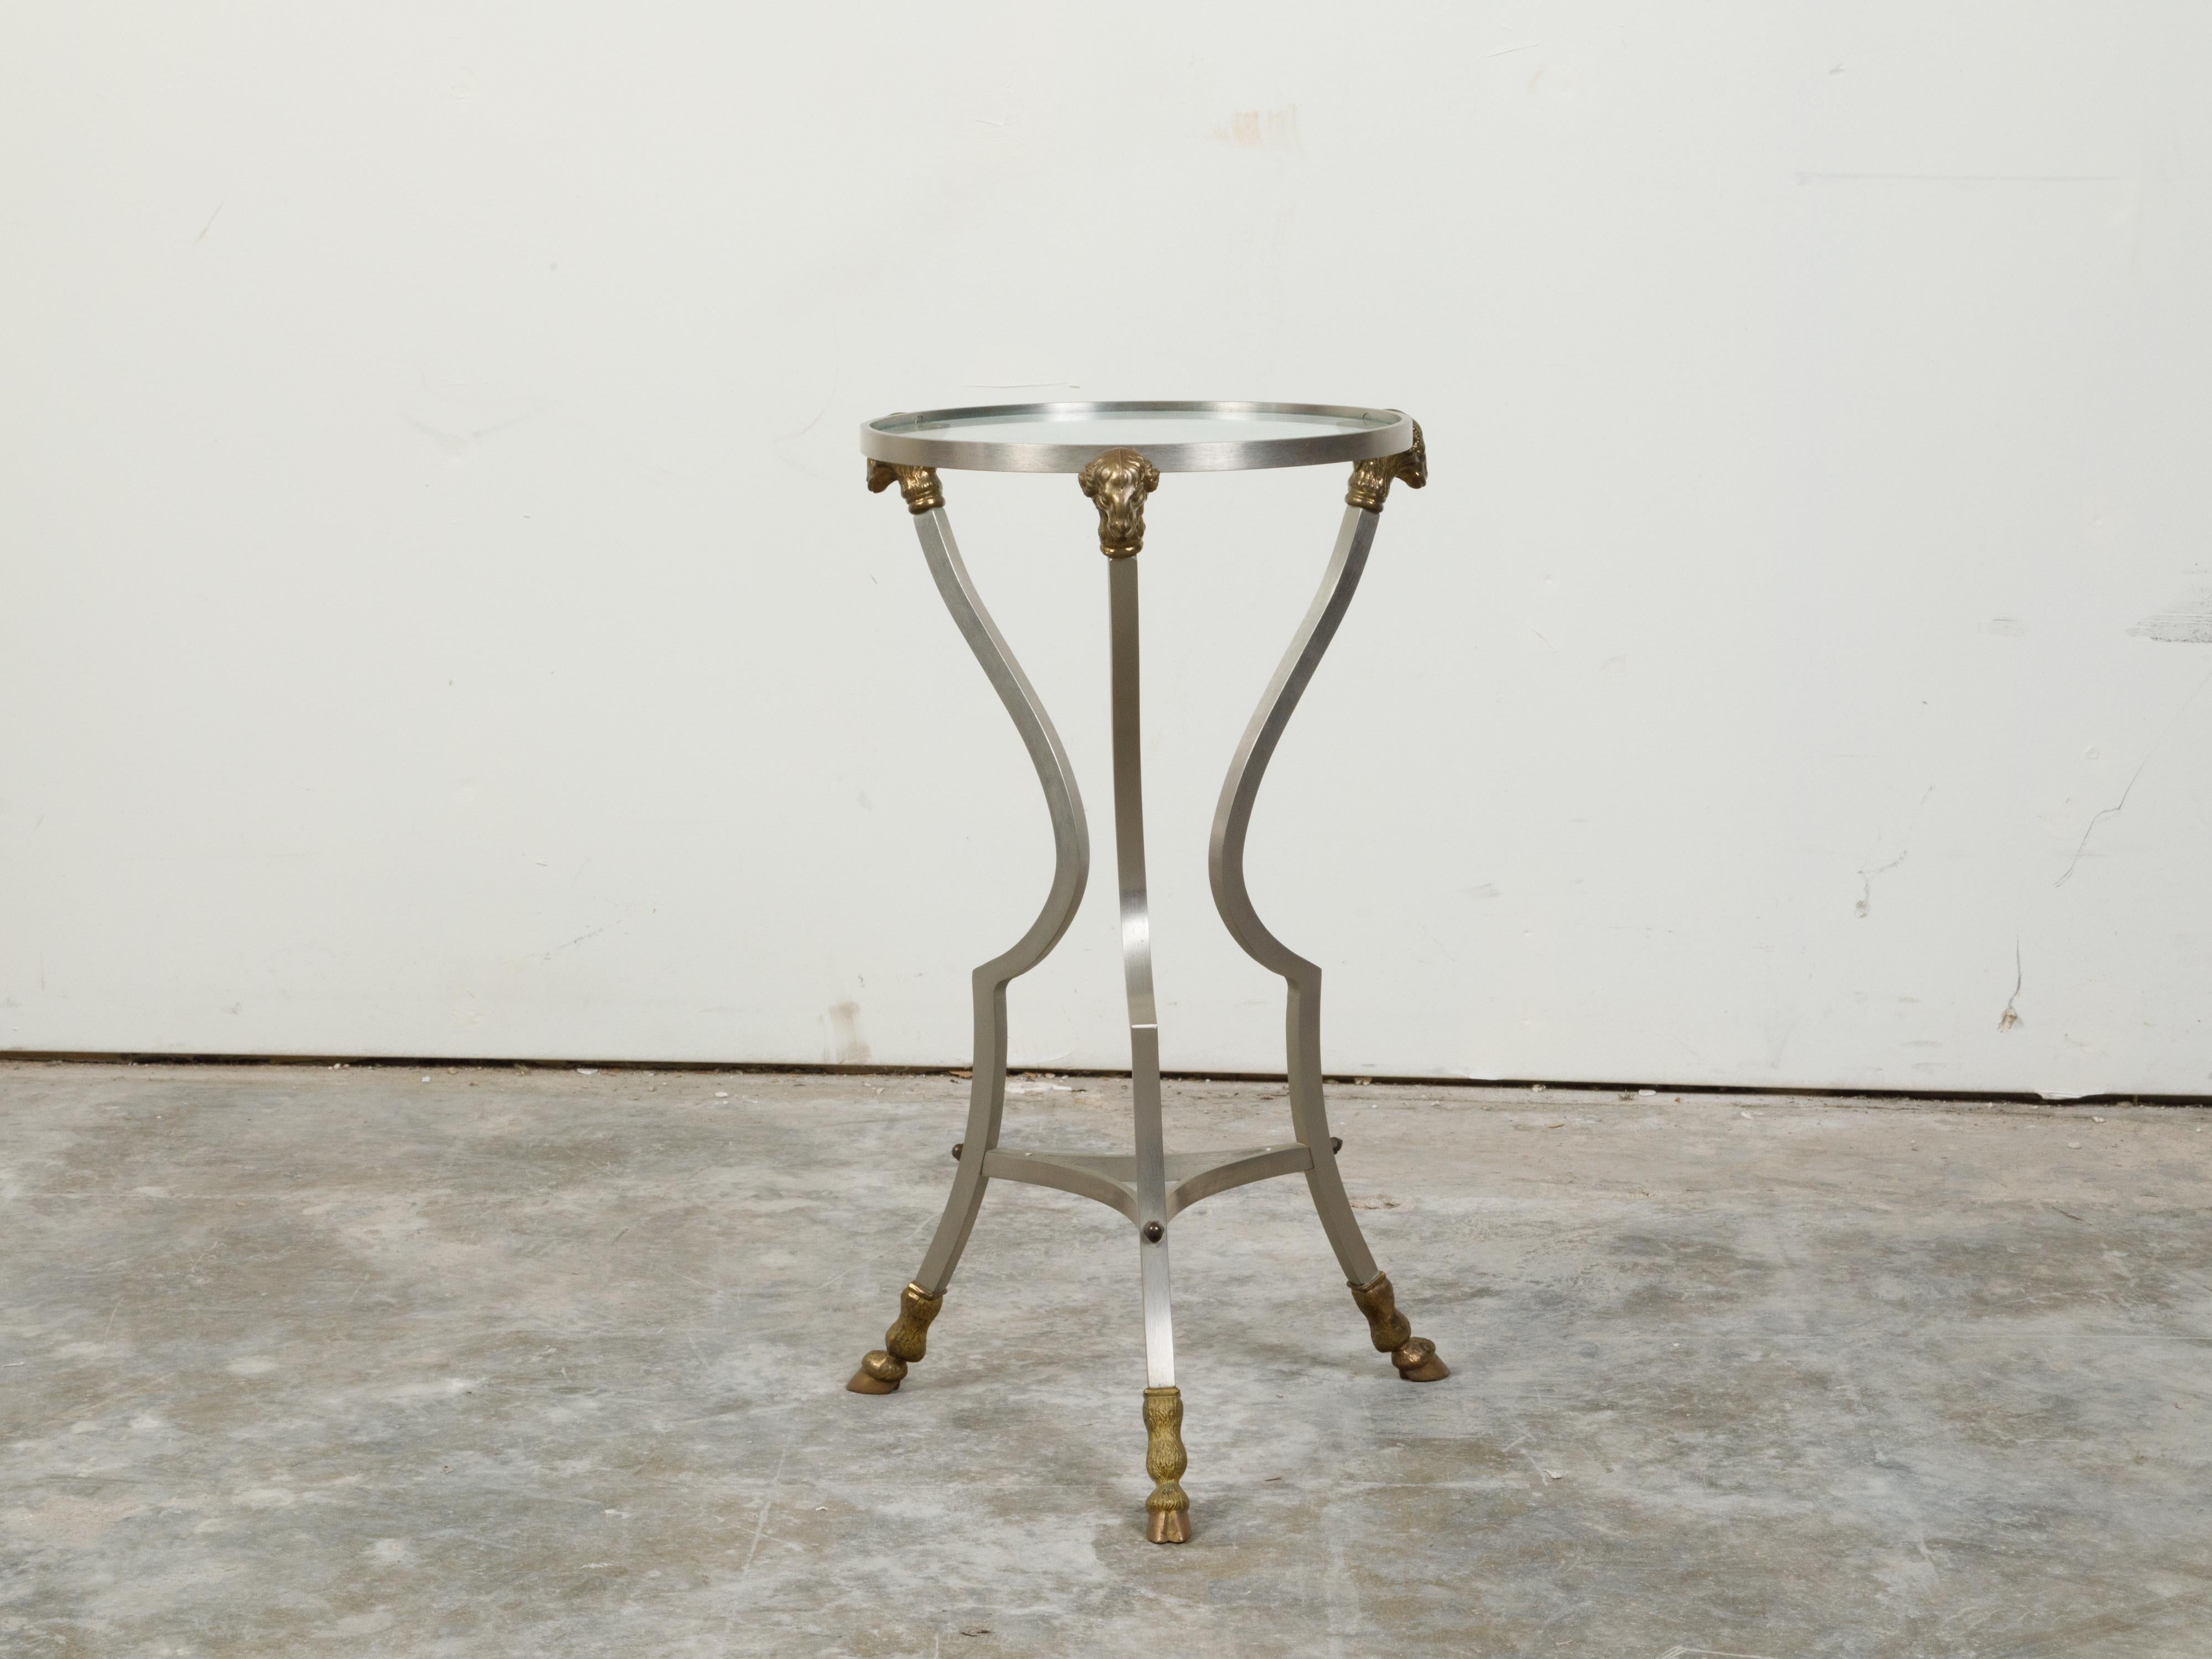 20th Century Italian Midcentury Directoire Style Side Table with Rams' Heads and Hoof Feet